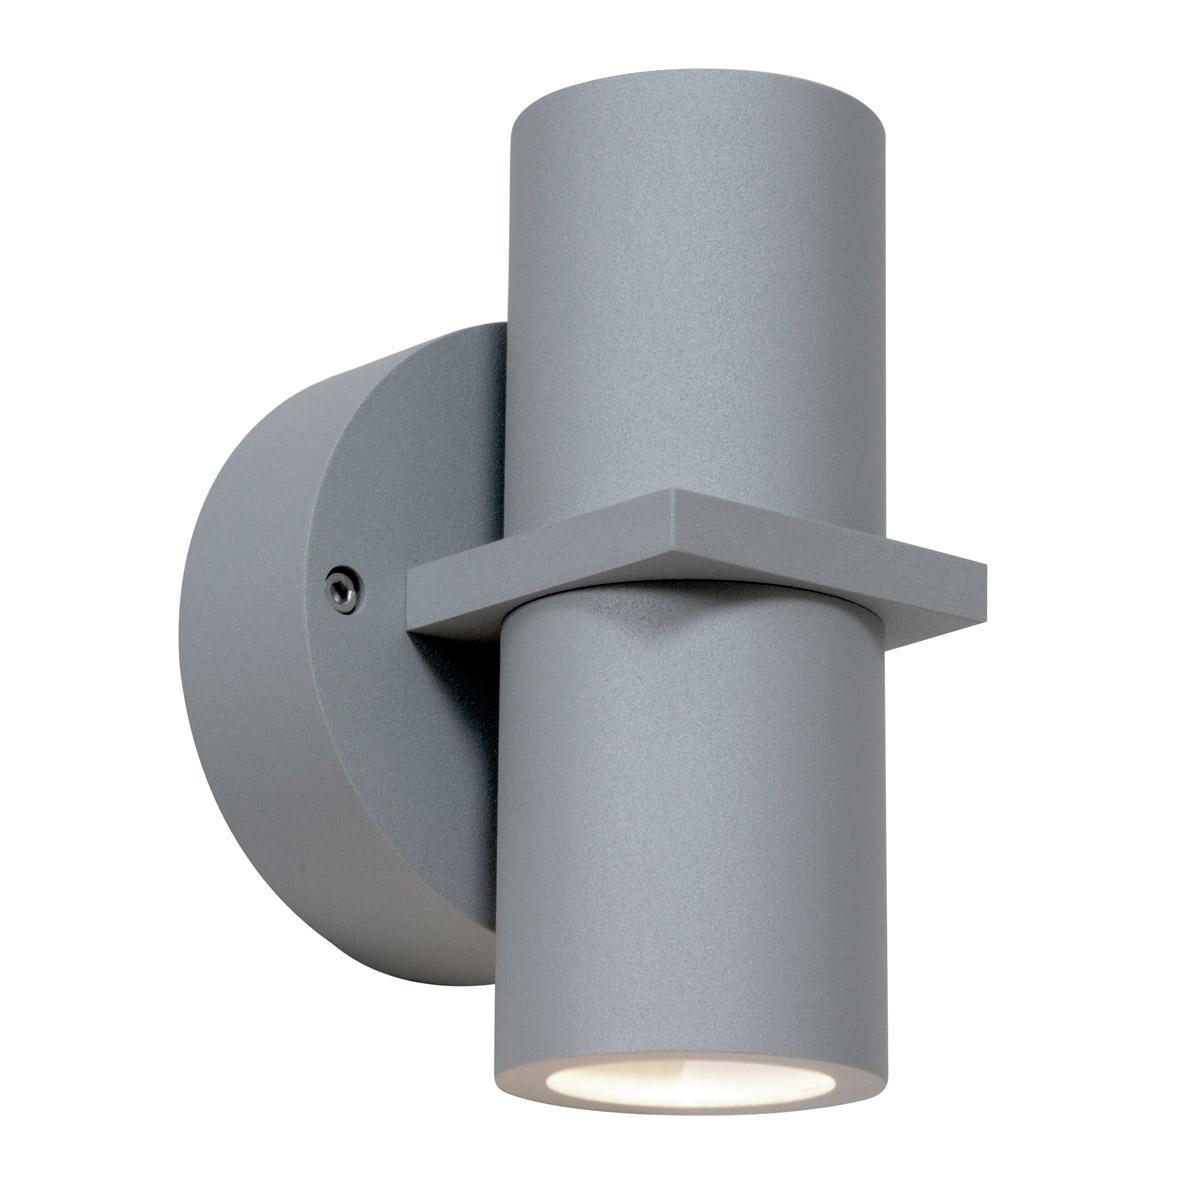 KO 7 In 2 Light LED Outdoor Cylinder Up/Down Wall Light